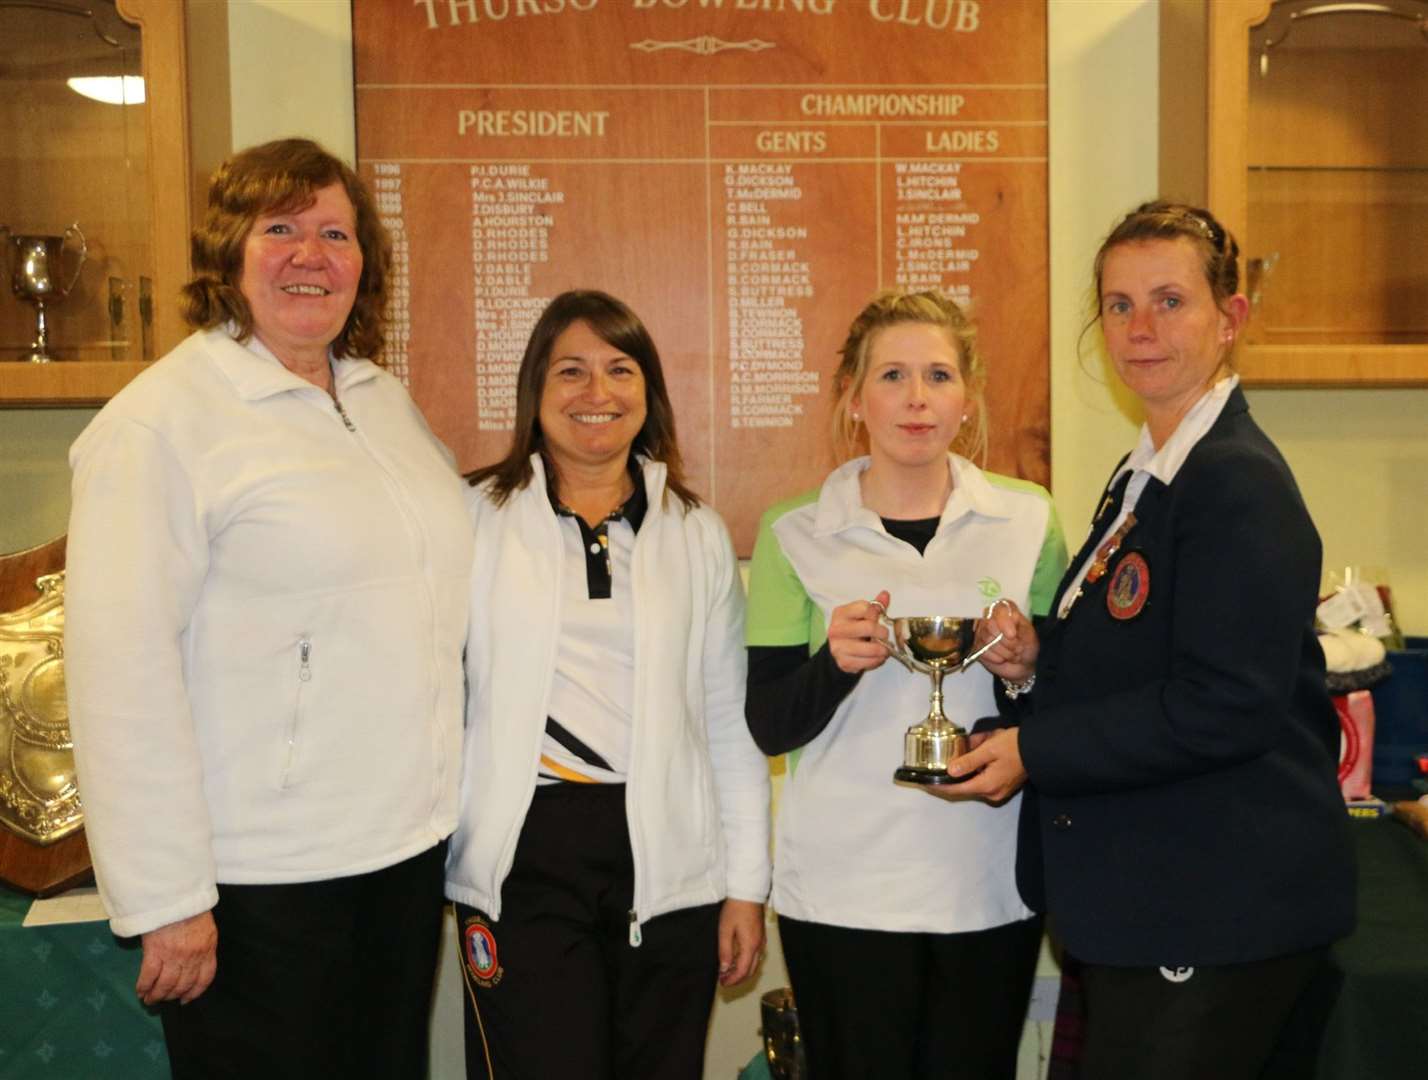 Ladies’ pairs runners-up Janet Sinclair and Julie Knapp with winners Lynne Swanson and Marina Bain.